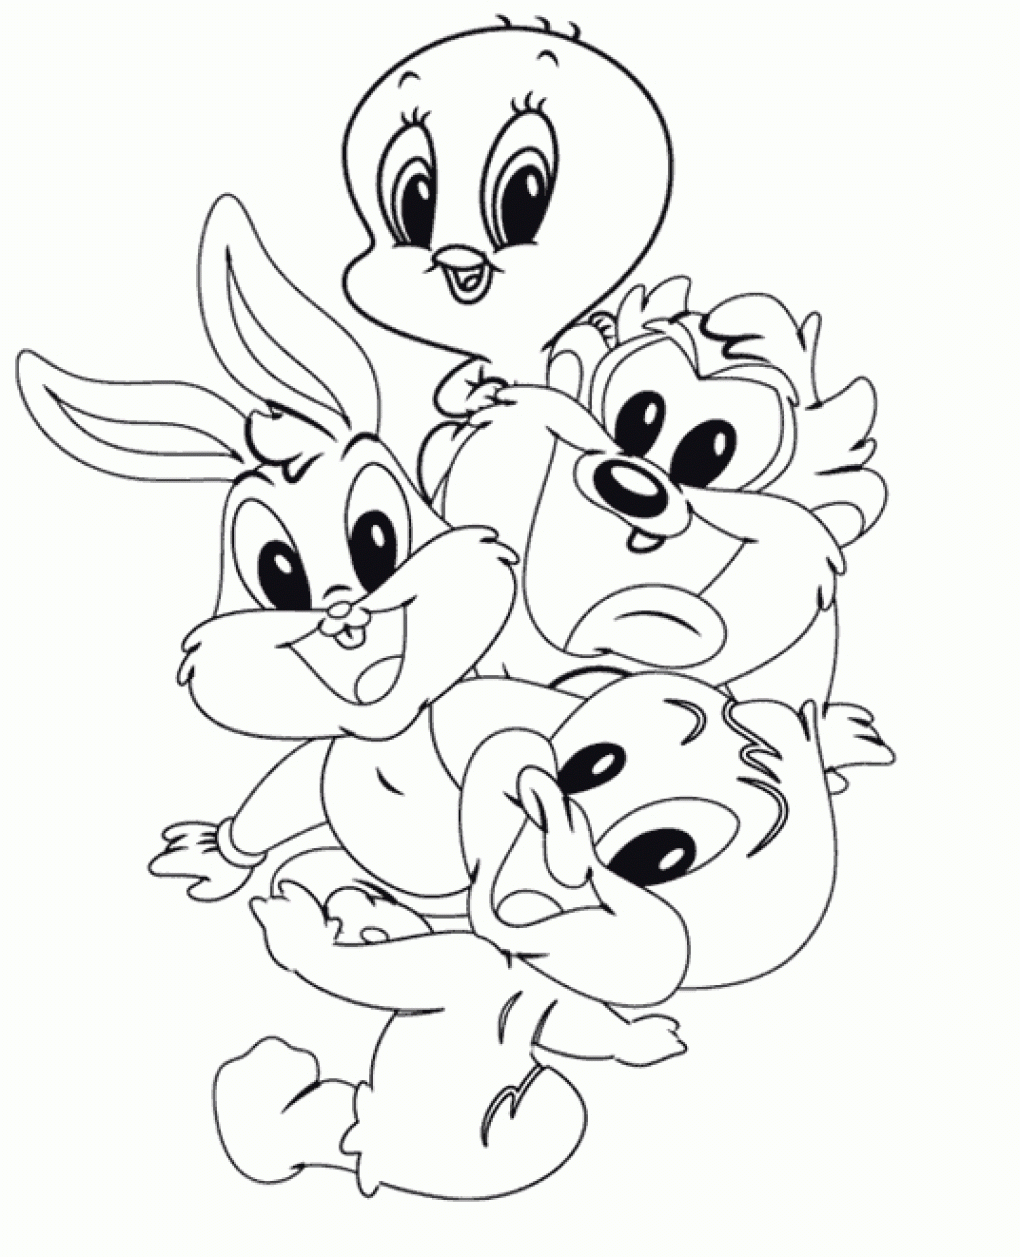 Baby Looly Toons Cartoon Drawings Ideas - Coloring Page Photos - Coloring  Home